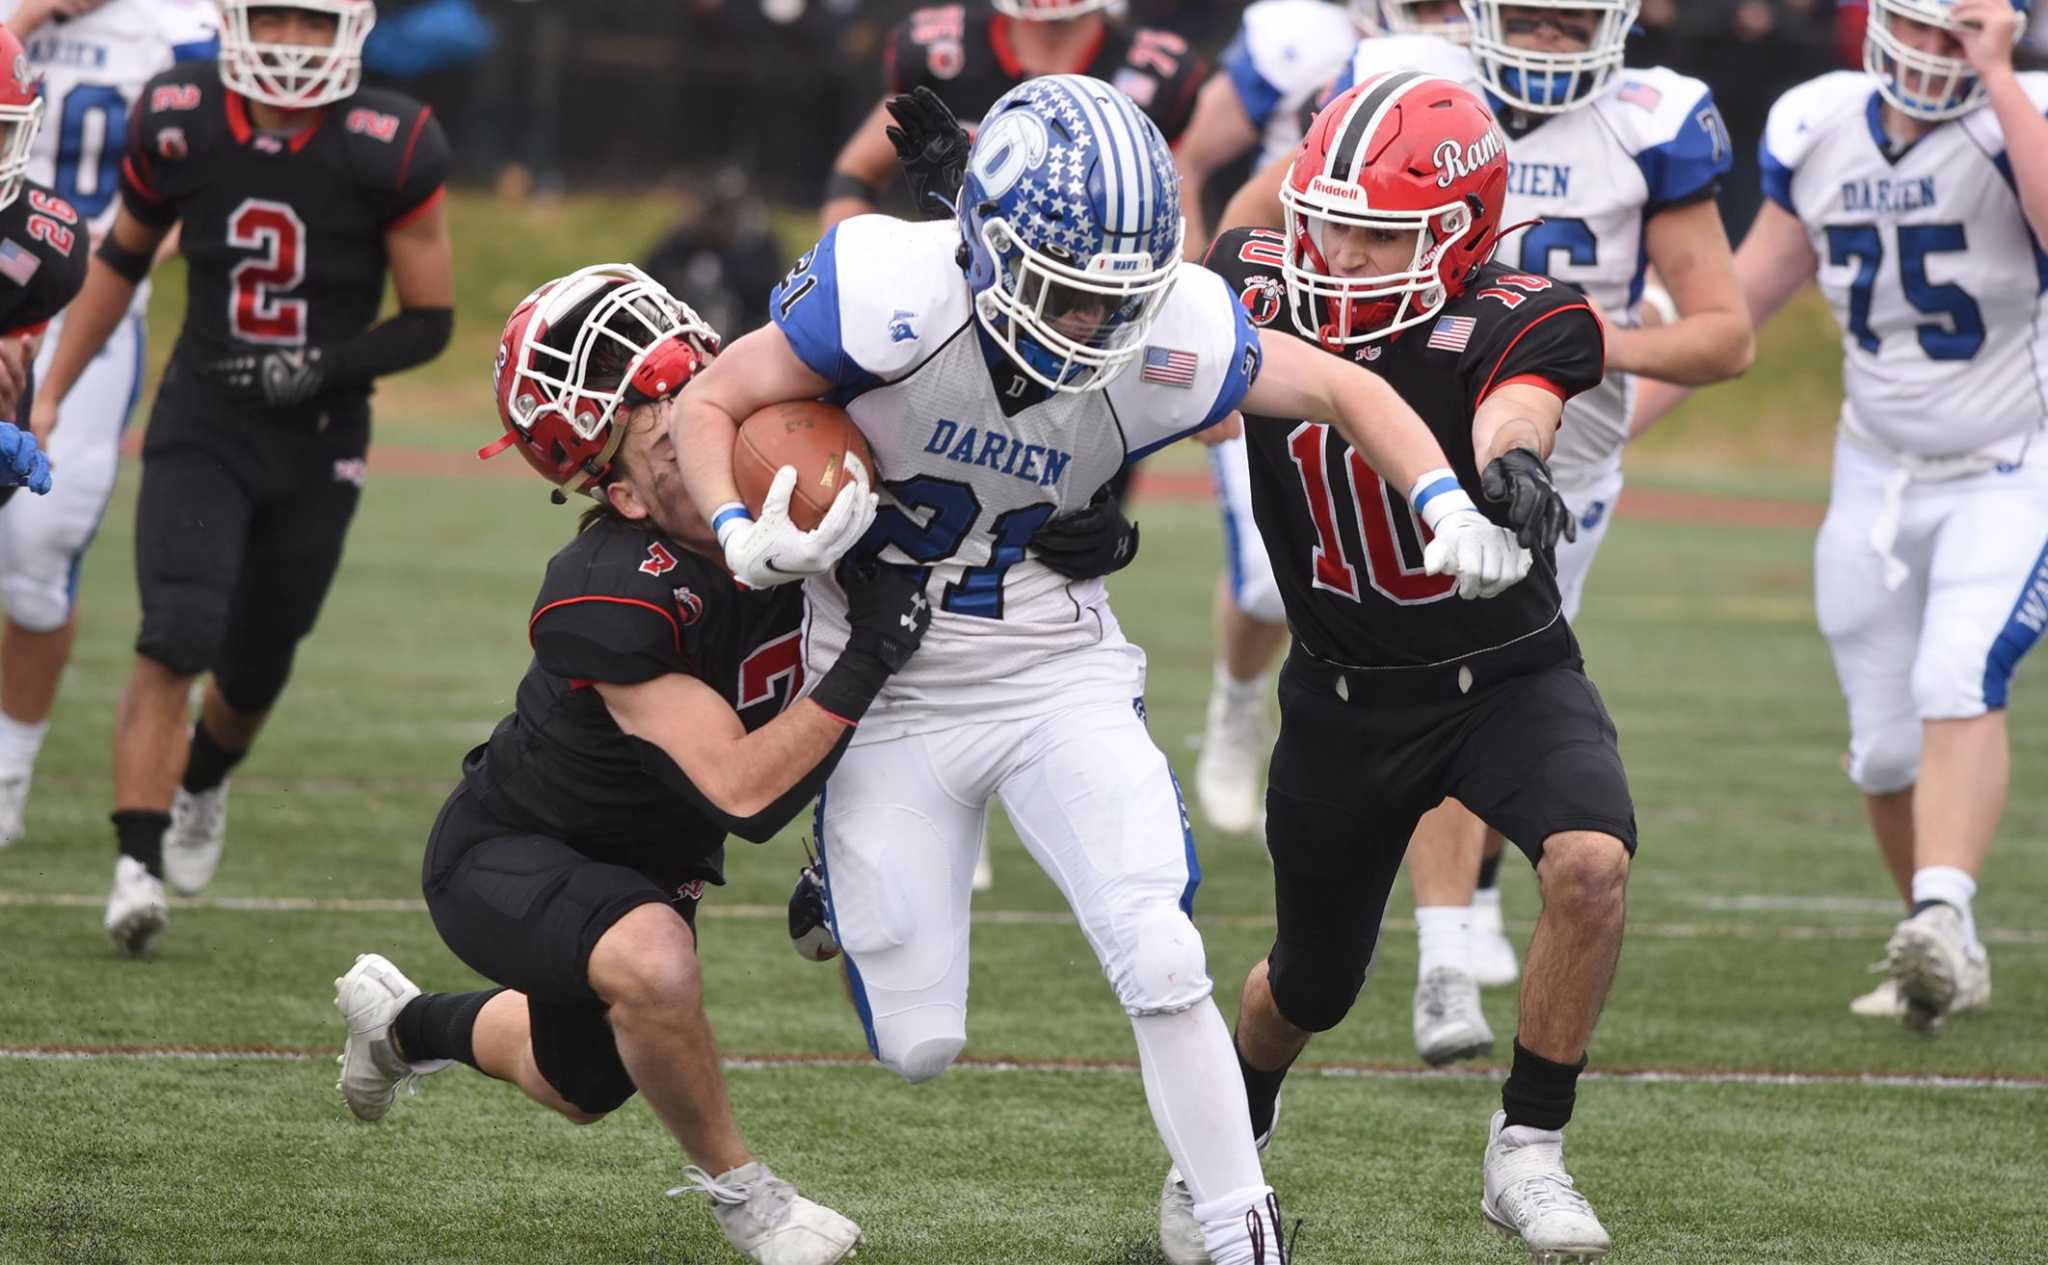 Connecticut high school football: CIAC Week 6 schedule, stats, rankings,  scores & more